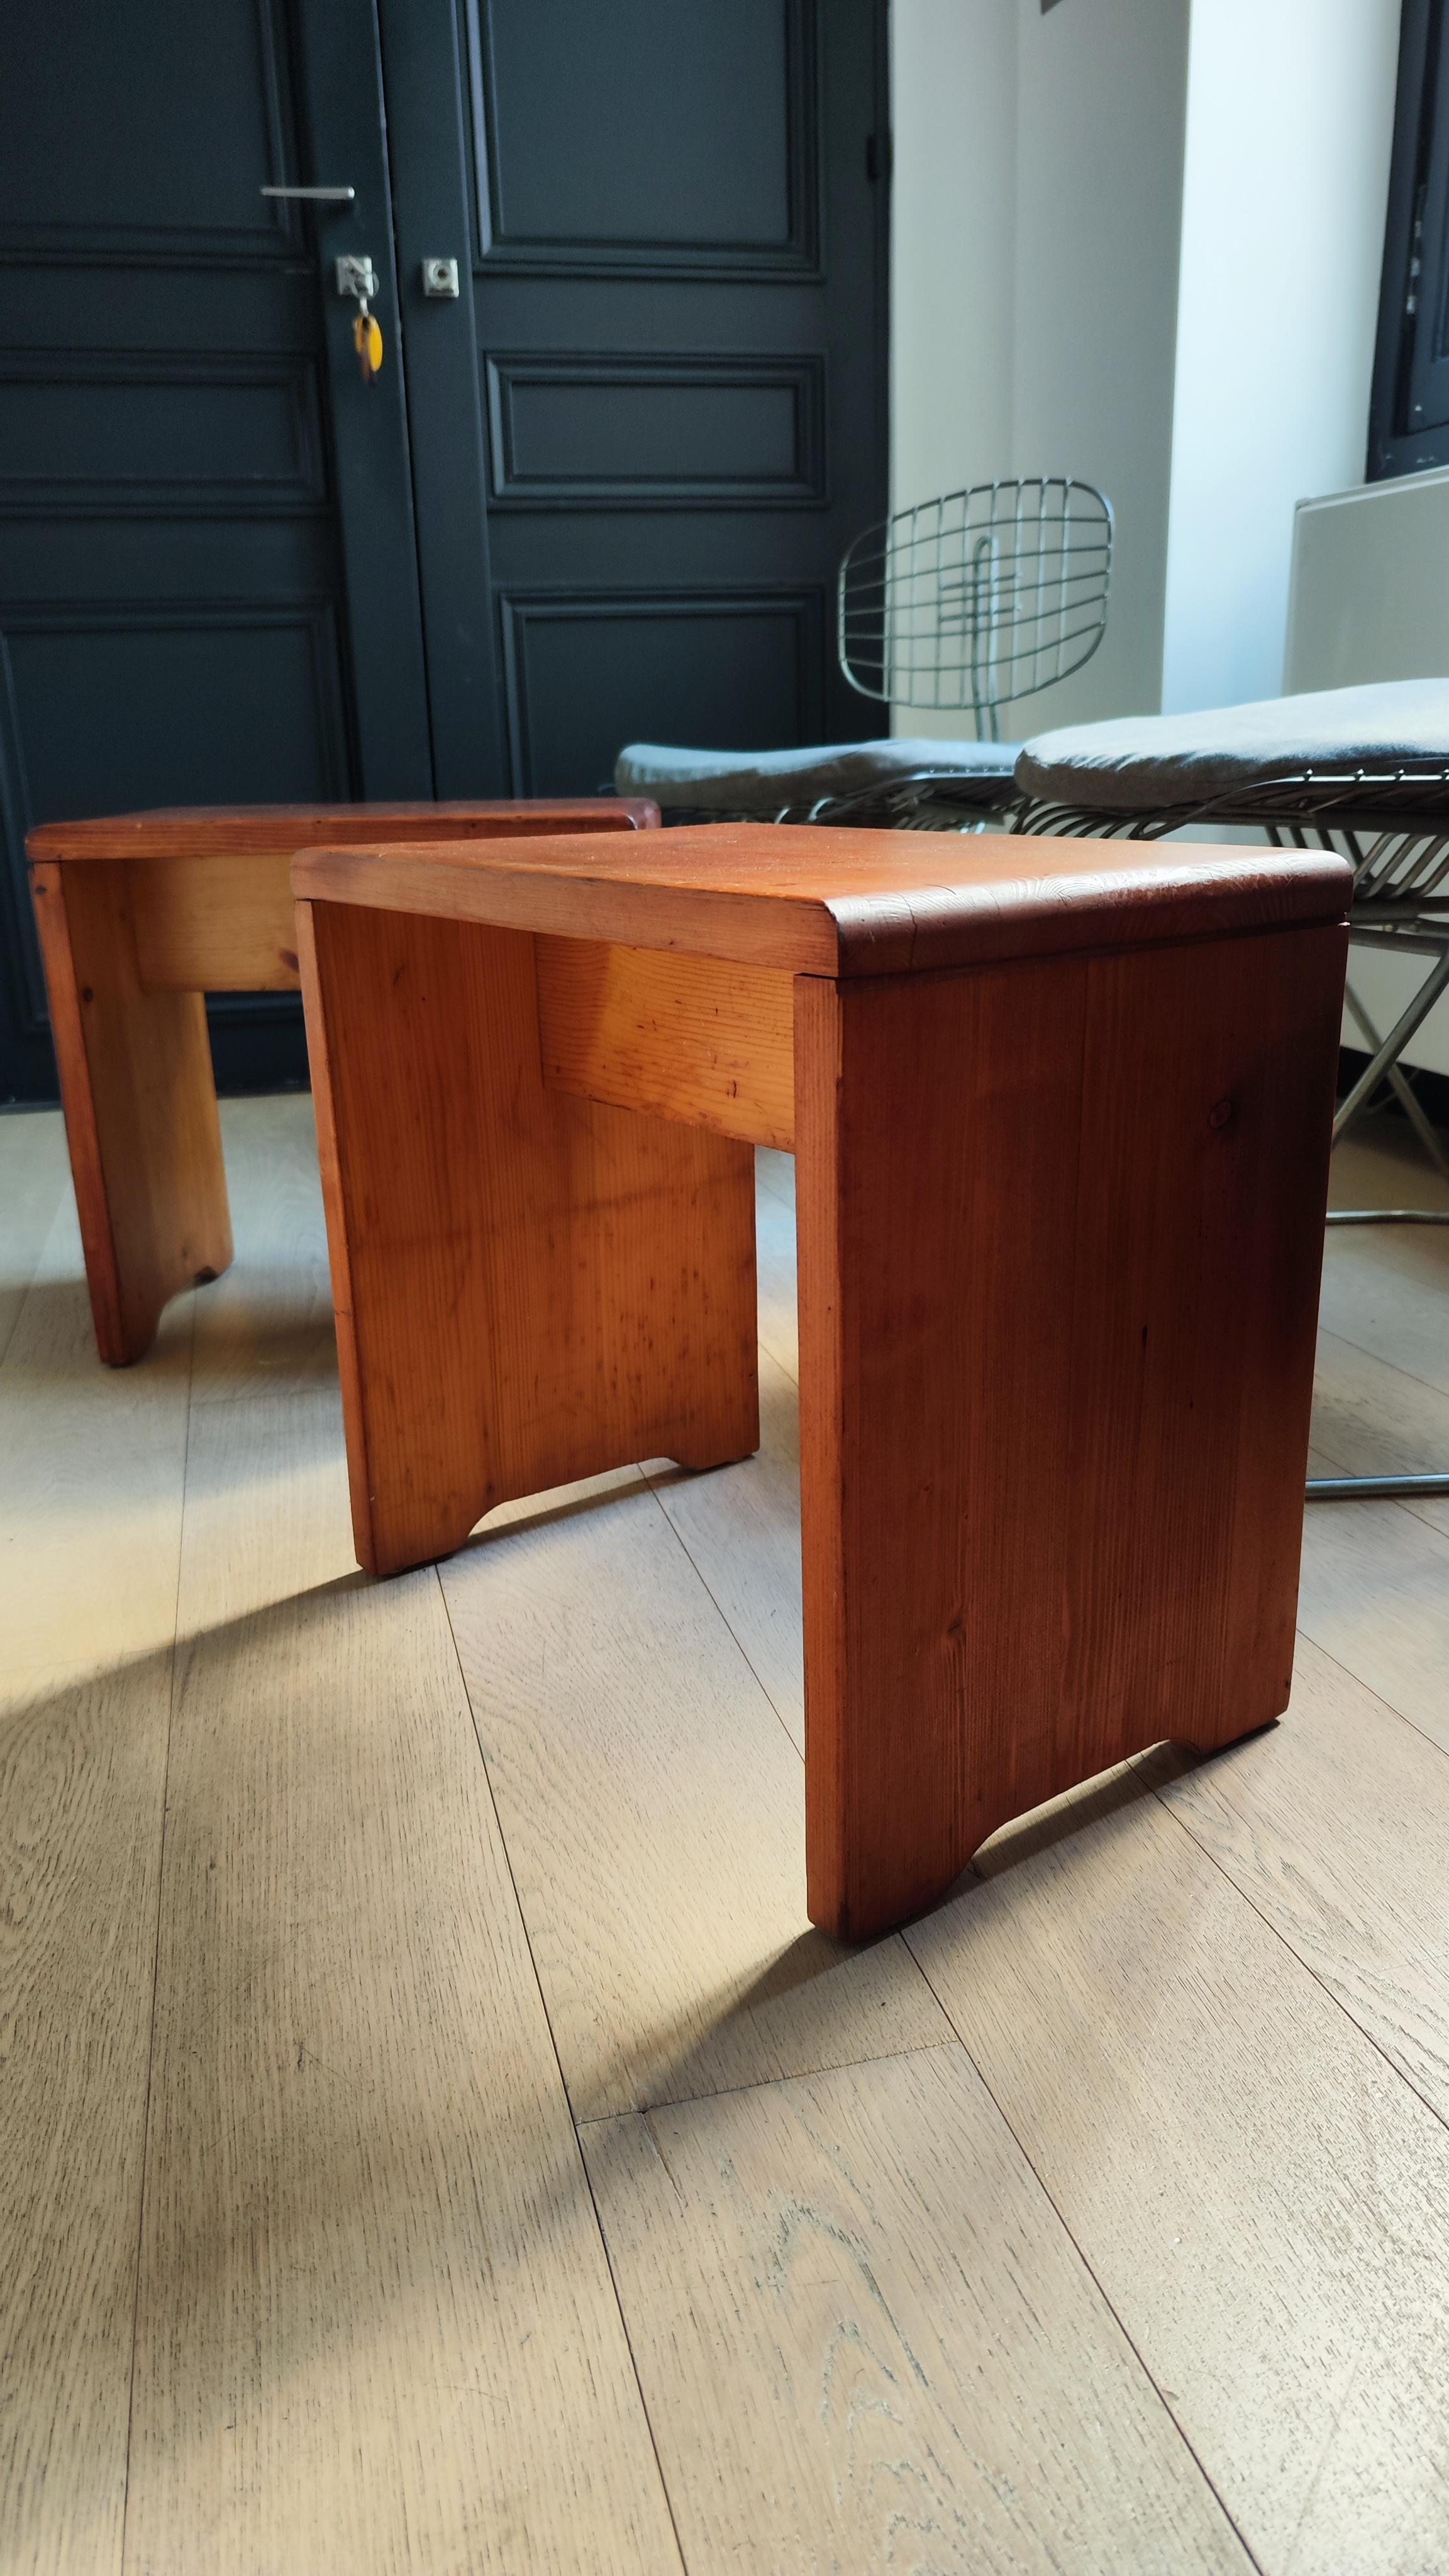 Perriand Pine Wood Stool Charlotte Perriand Pierre Et Vacances Les Arcs, 1800 For Sale 4